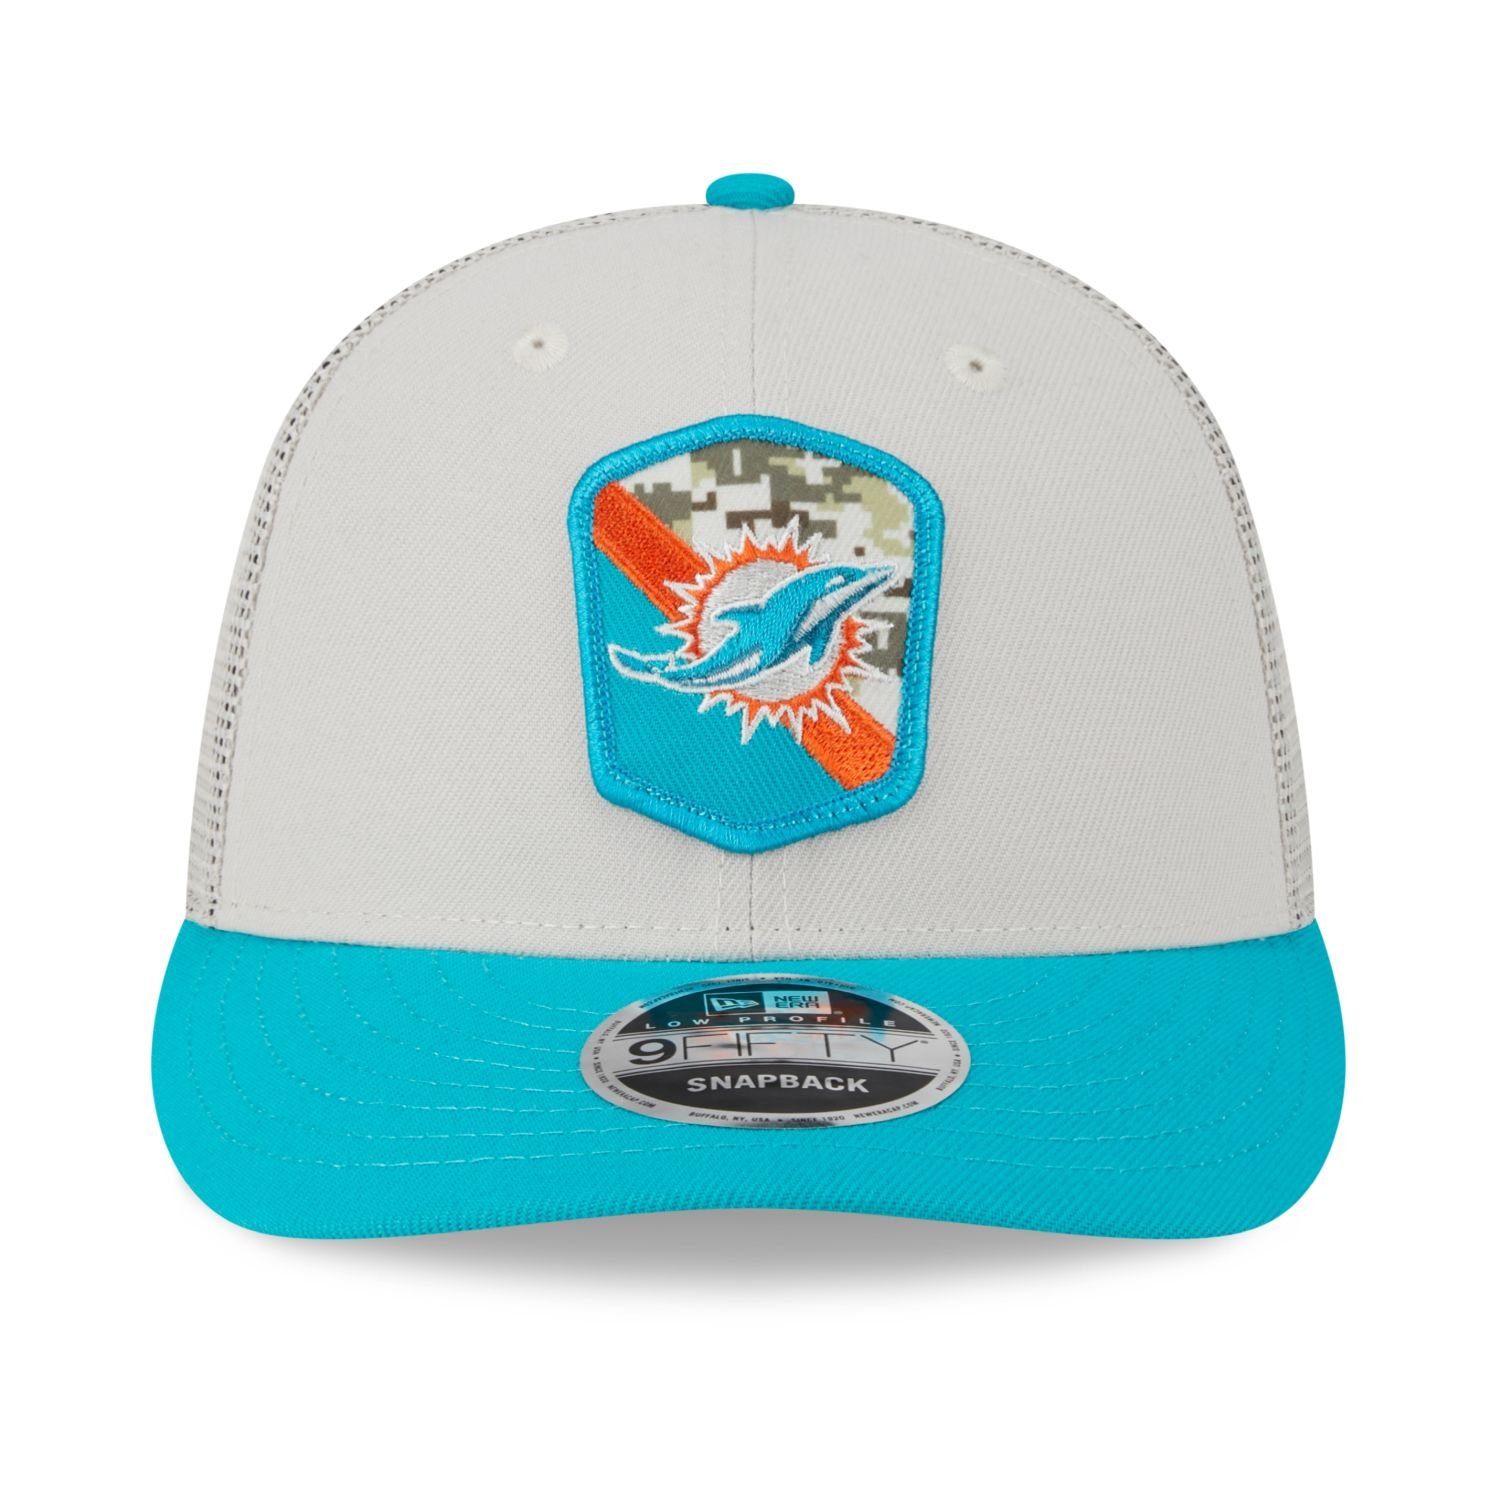 Snap Low Miami Service 9Fifty New Salute Cap Era Snapback NFL Dolphins Profile to